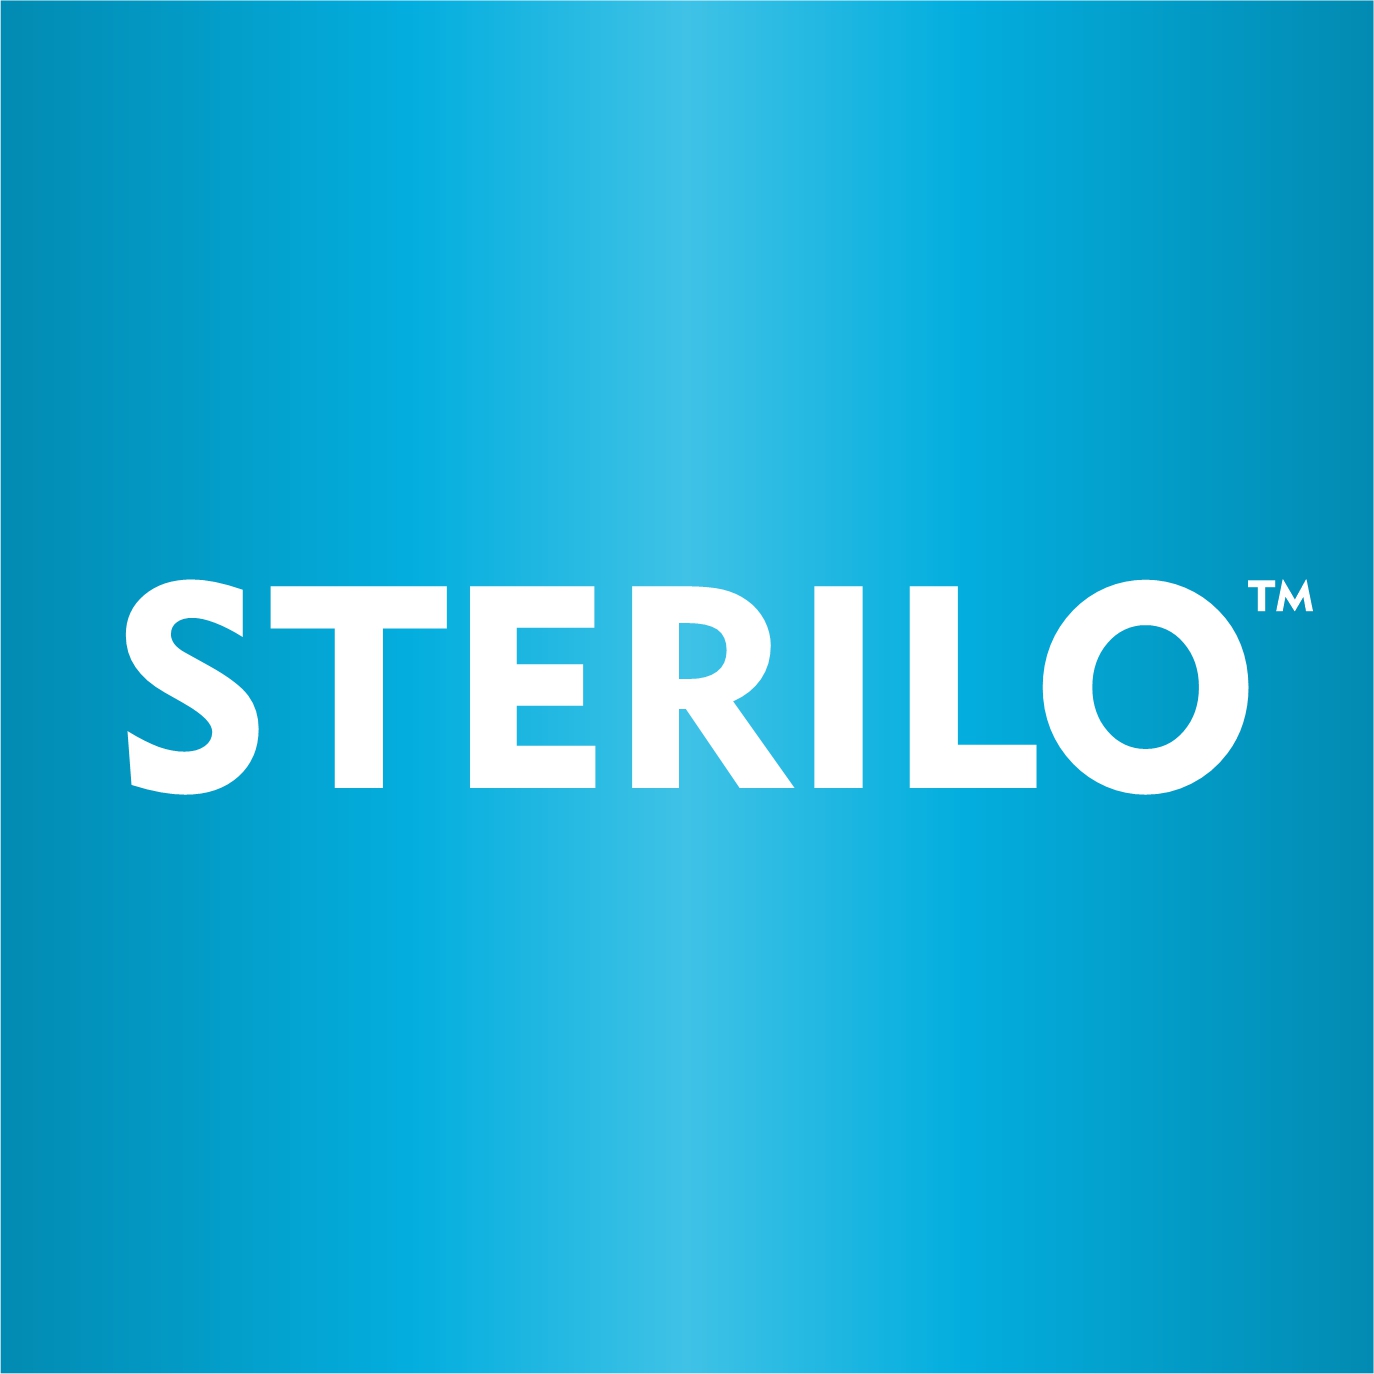 STERILO OFFICIAL STORE